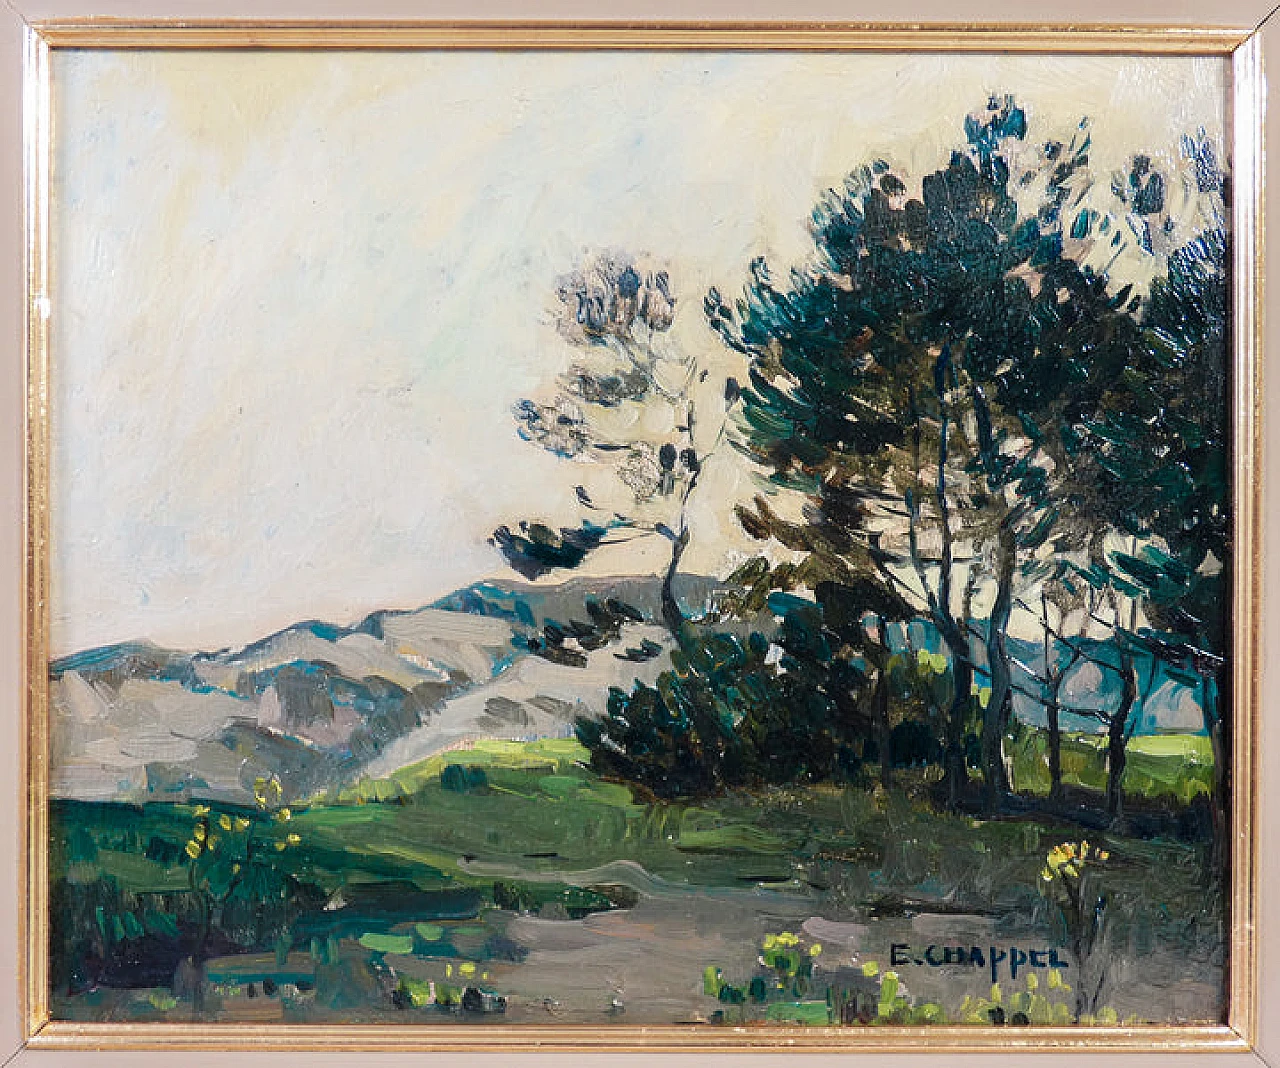 Edward Chappel, landscape, oil painting on panel, late 19th century 3